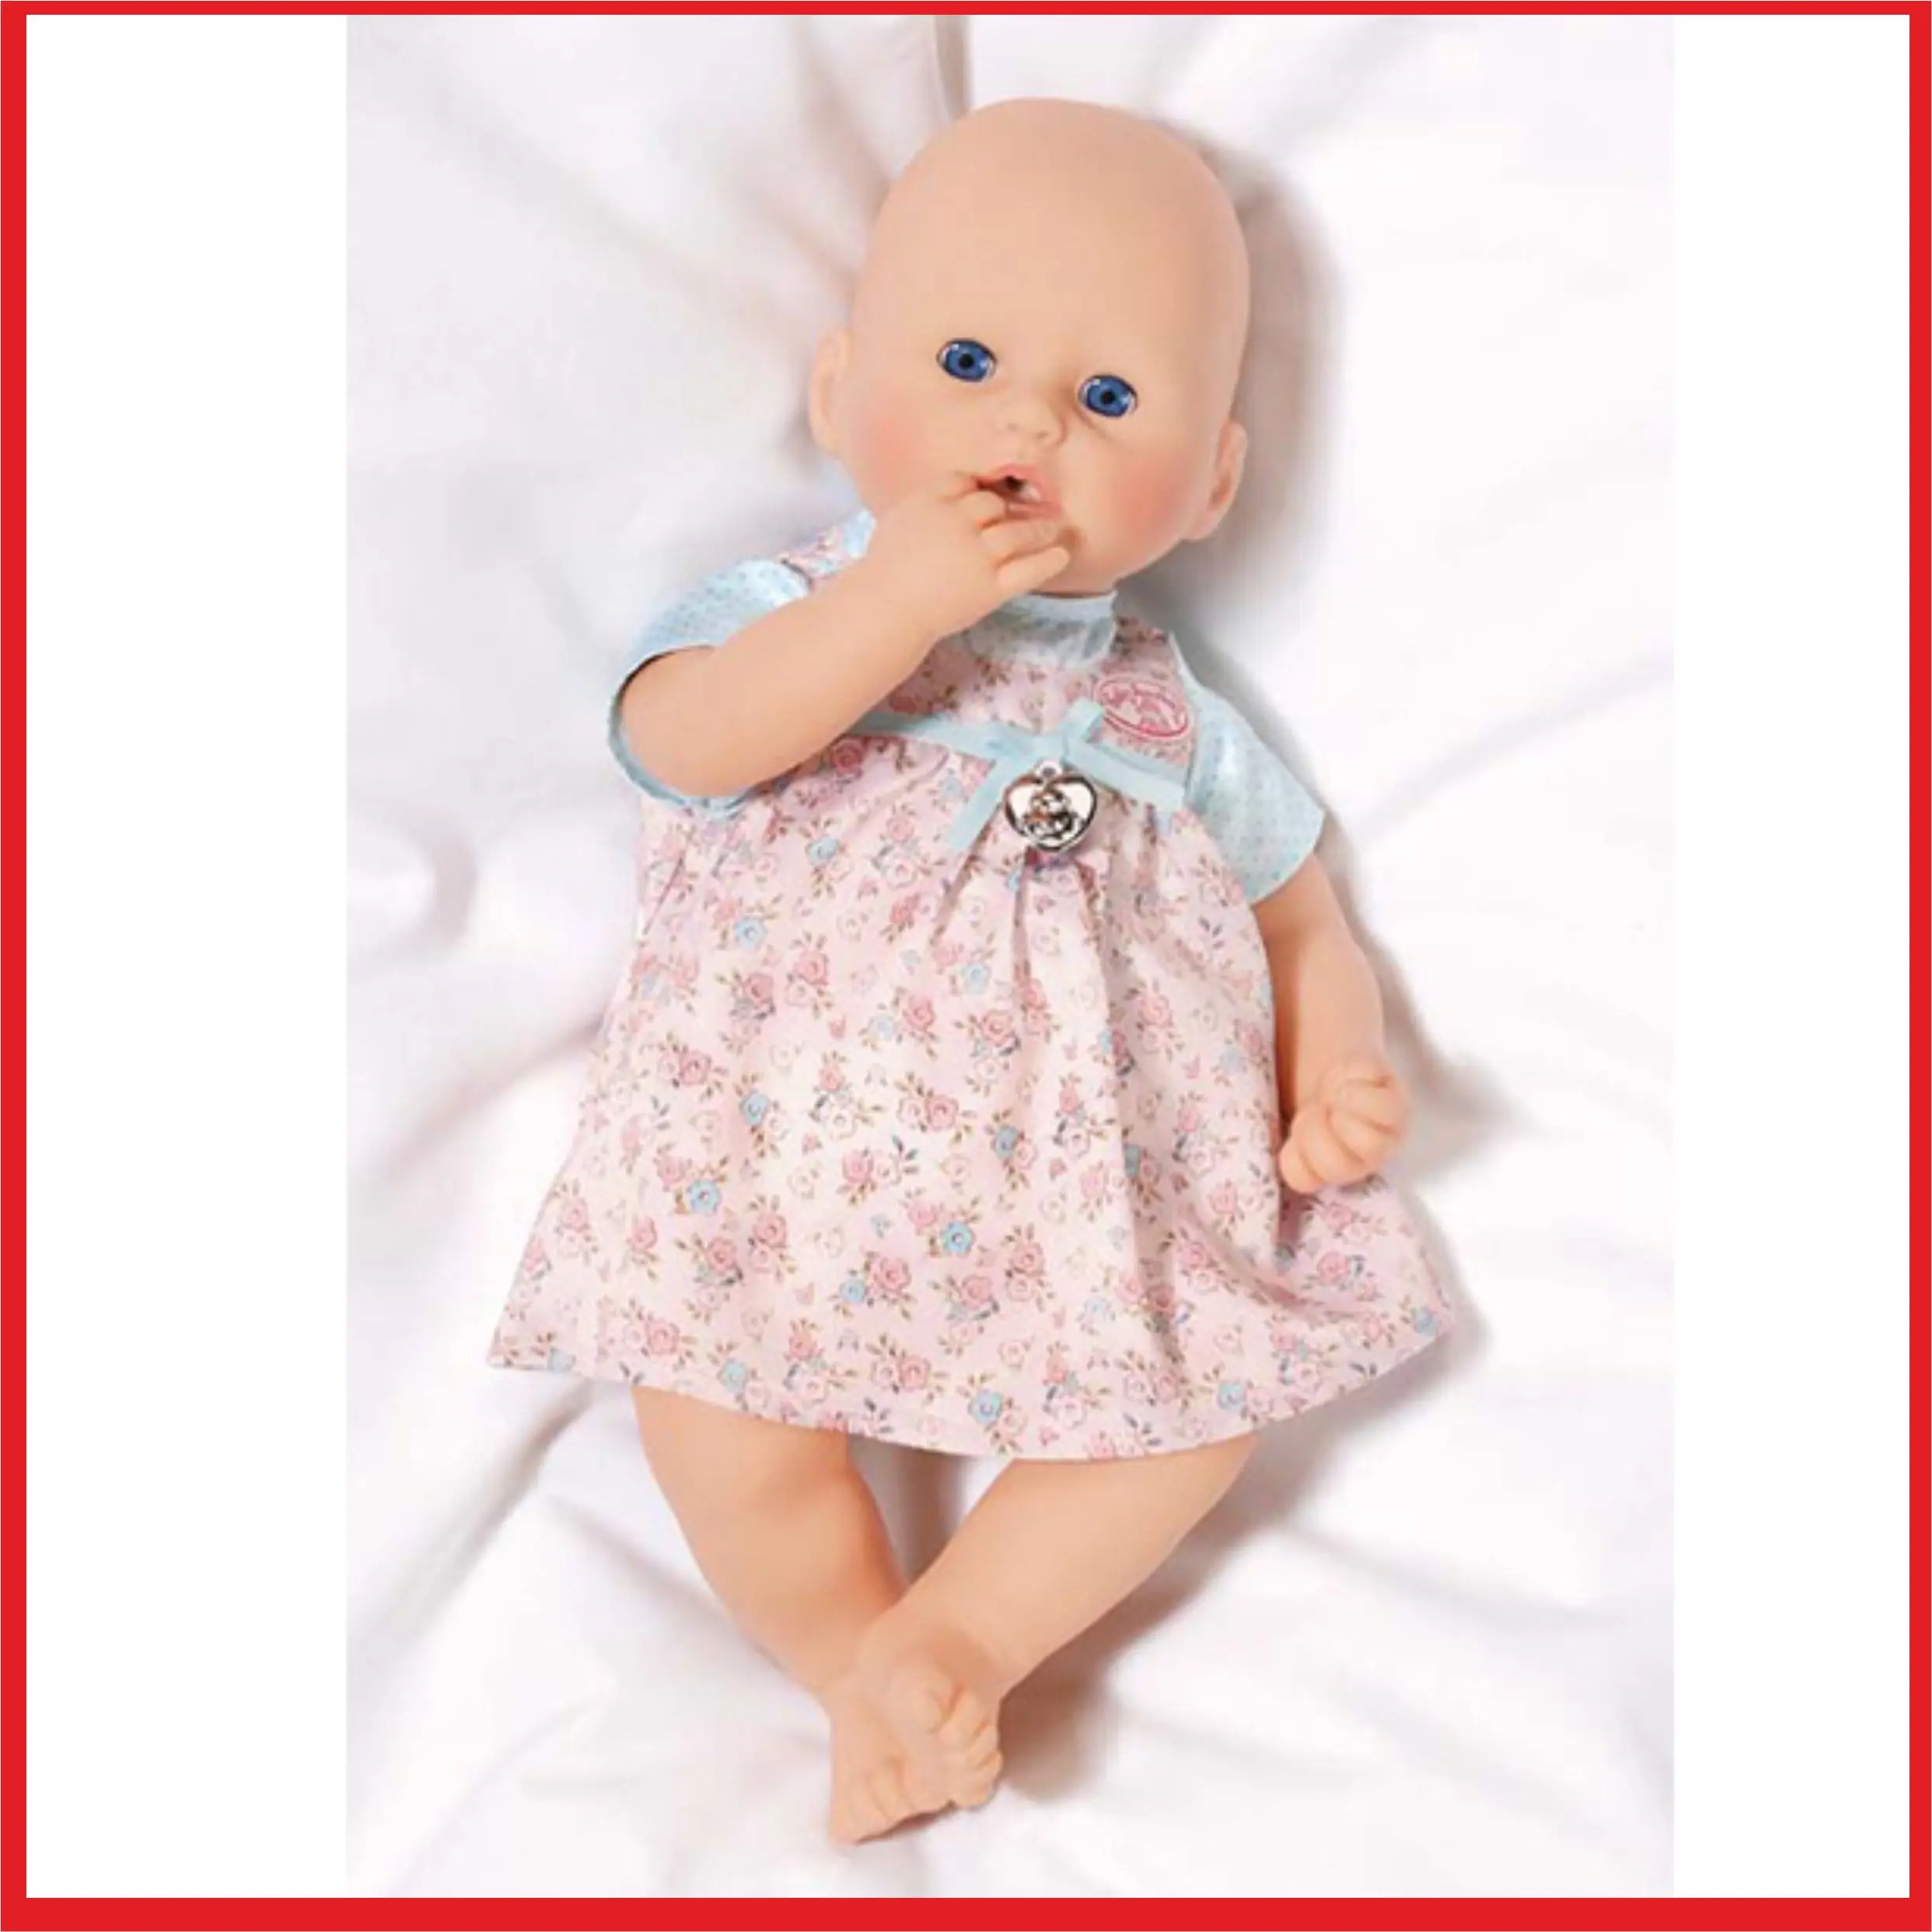 Clothes Dresses For Dolls Zapf Creation Baby 794-531 Baby Annabelle, Stock), Accessory For Dolls, Original - Dolls Accessories - AliExpress